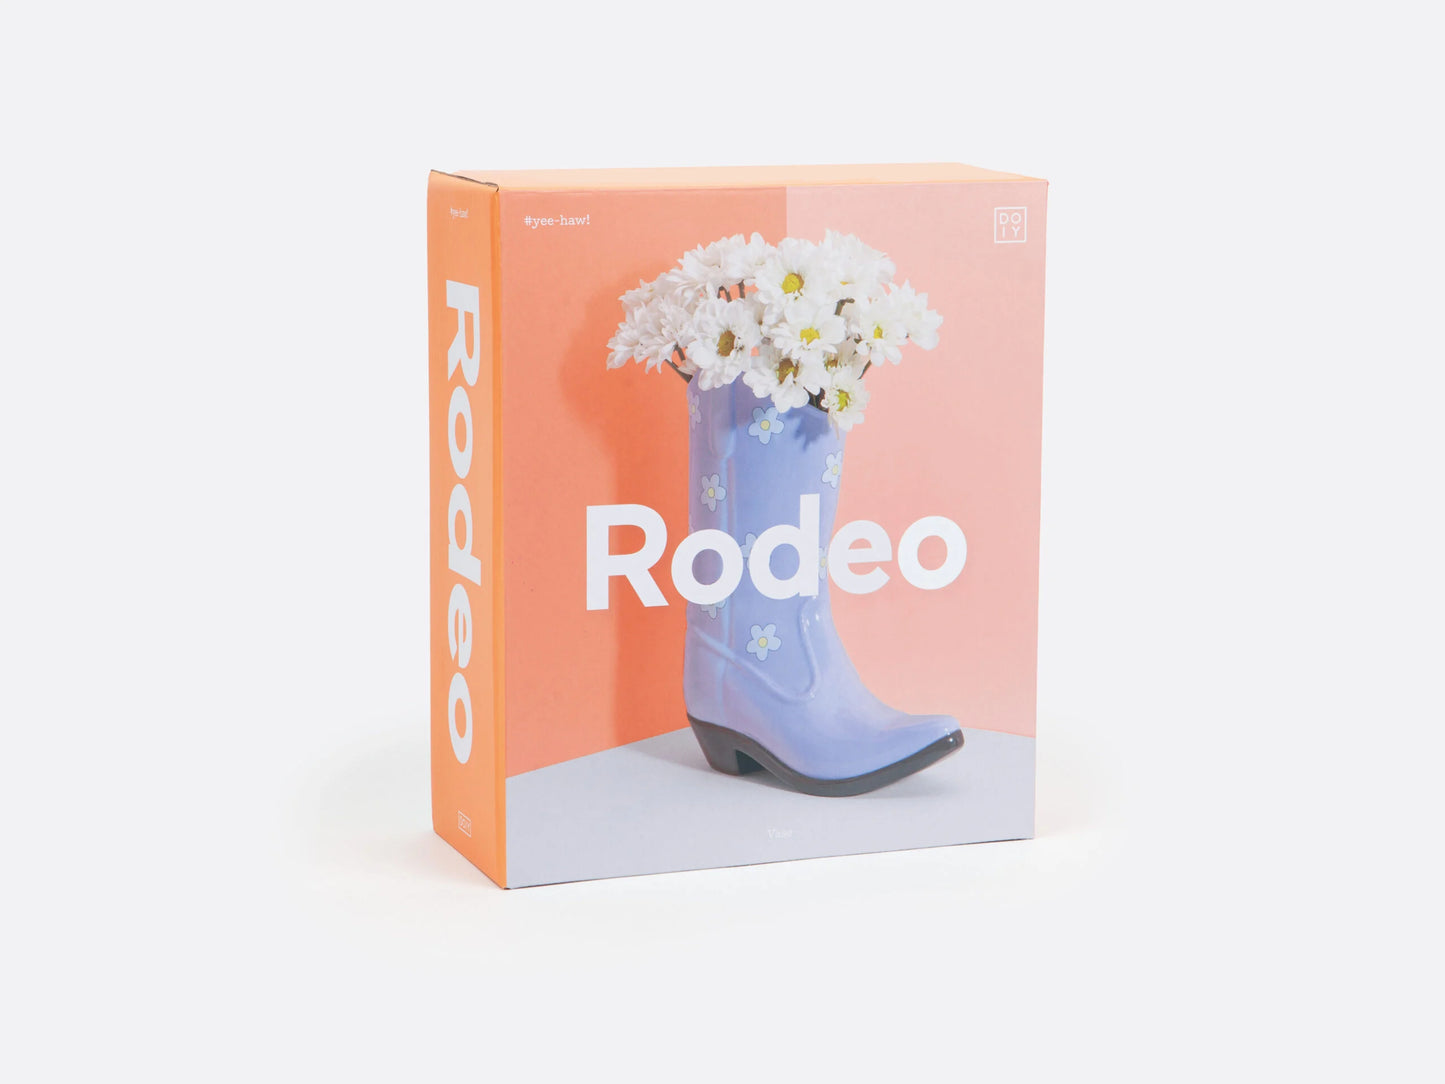 Vase rodeo cowboy boot - lilac | Doiydesign